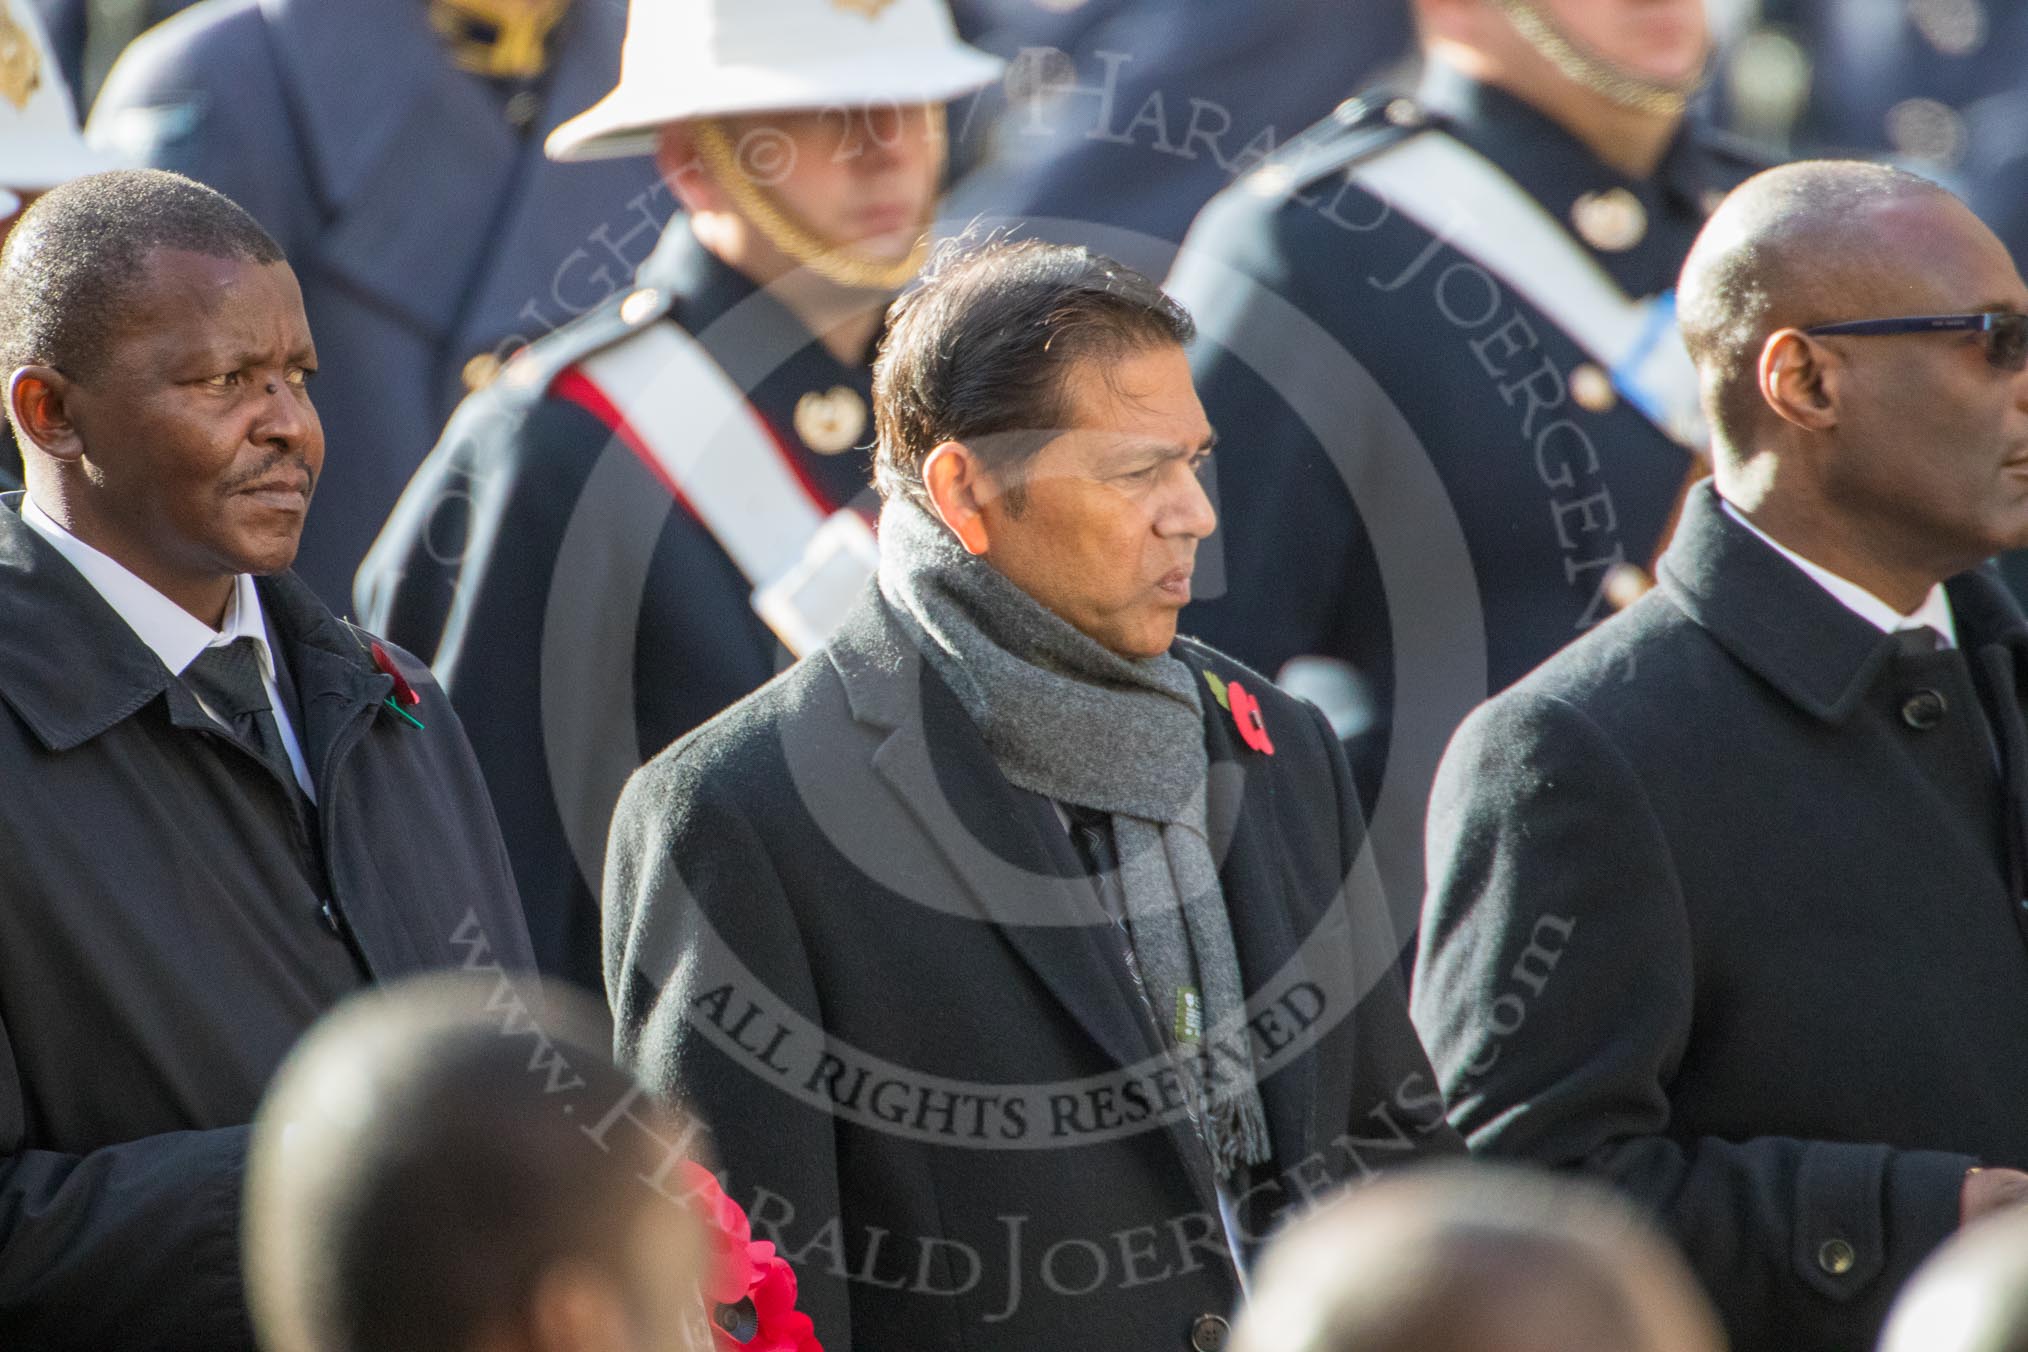 The High Commissioner of Eswatini (the former Swaziland) and the  High Commissioner of Mauritius during Remembrance Sunday Cenotaph Ceremony 2018 at Horse Guards Parade, Westminster, London, 11 November 2018, 11:13.